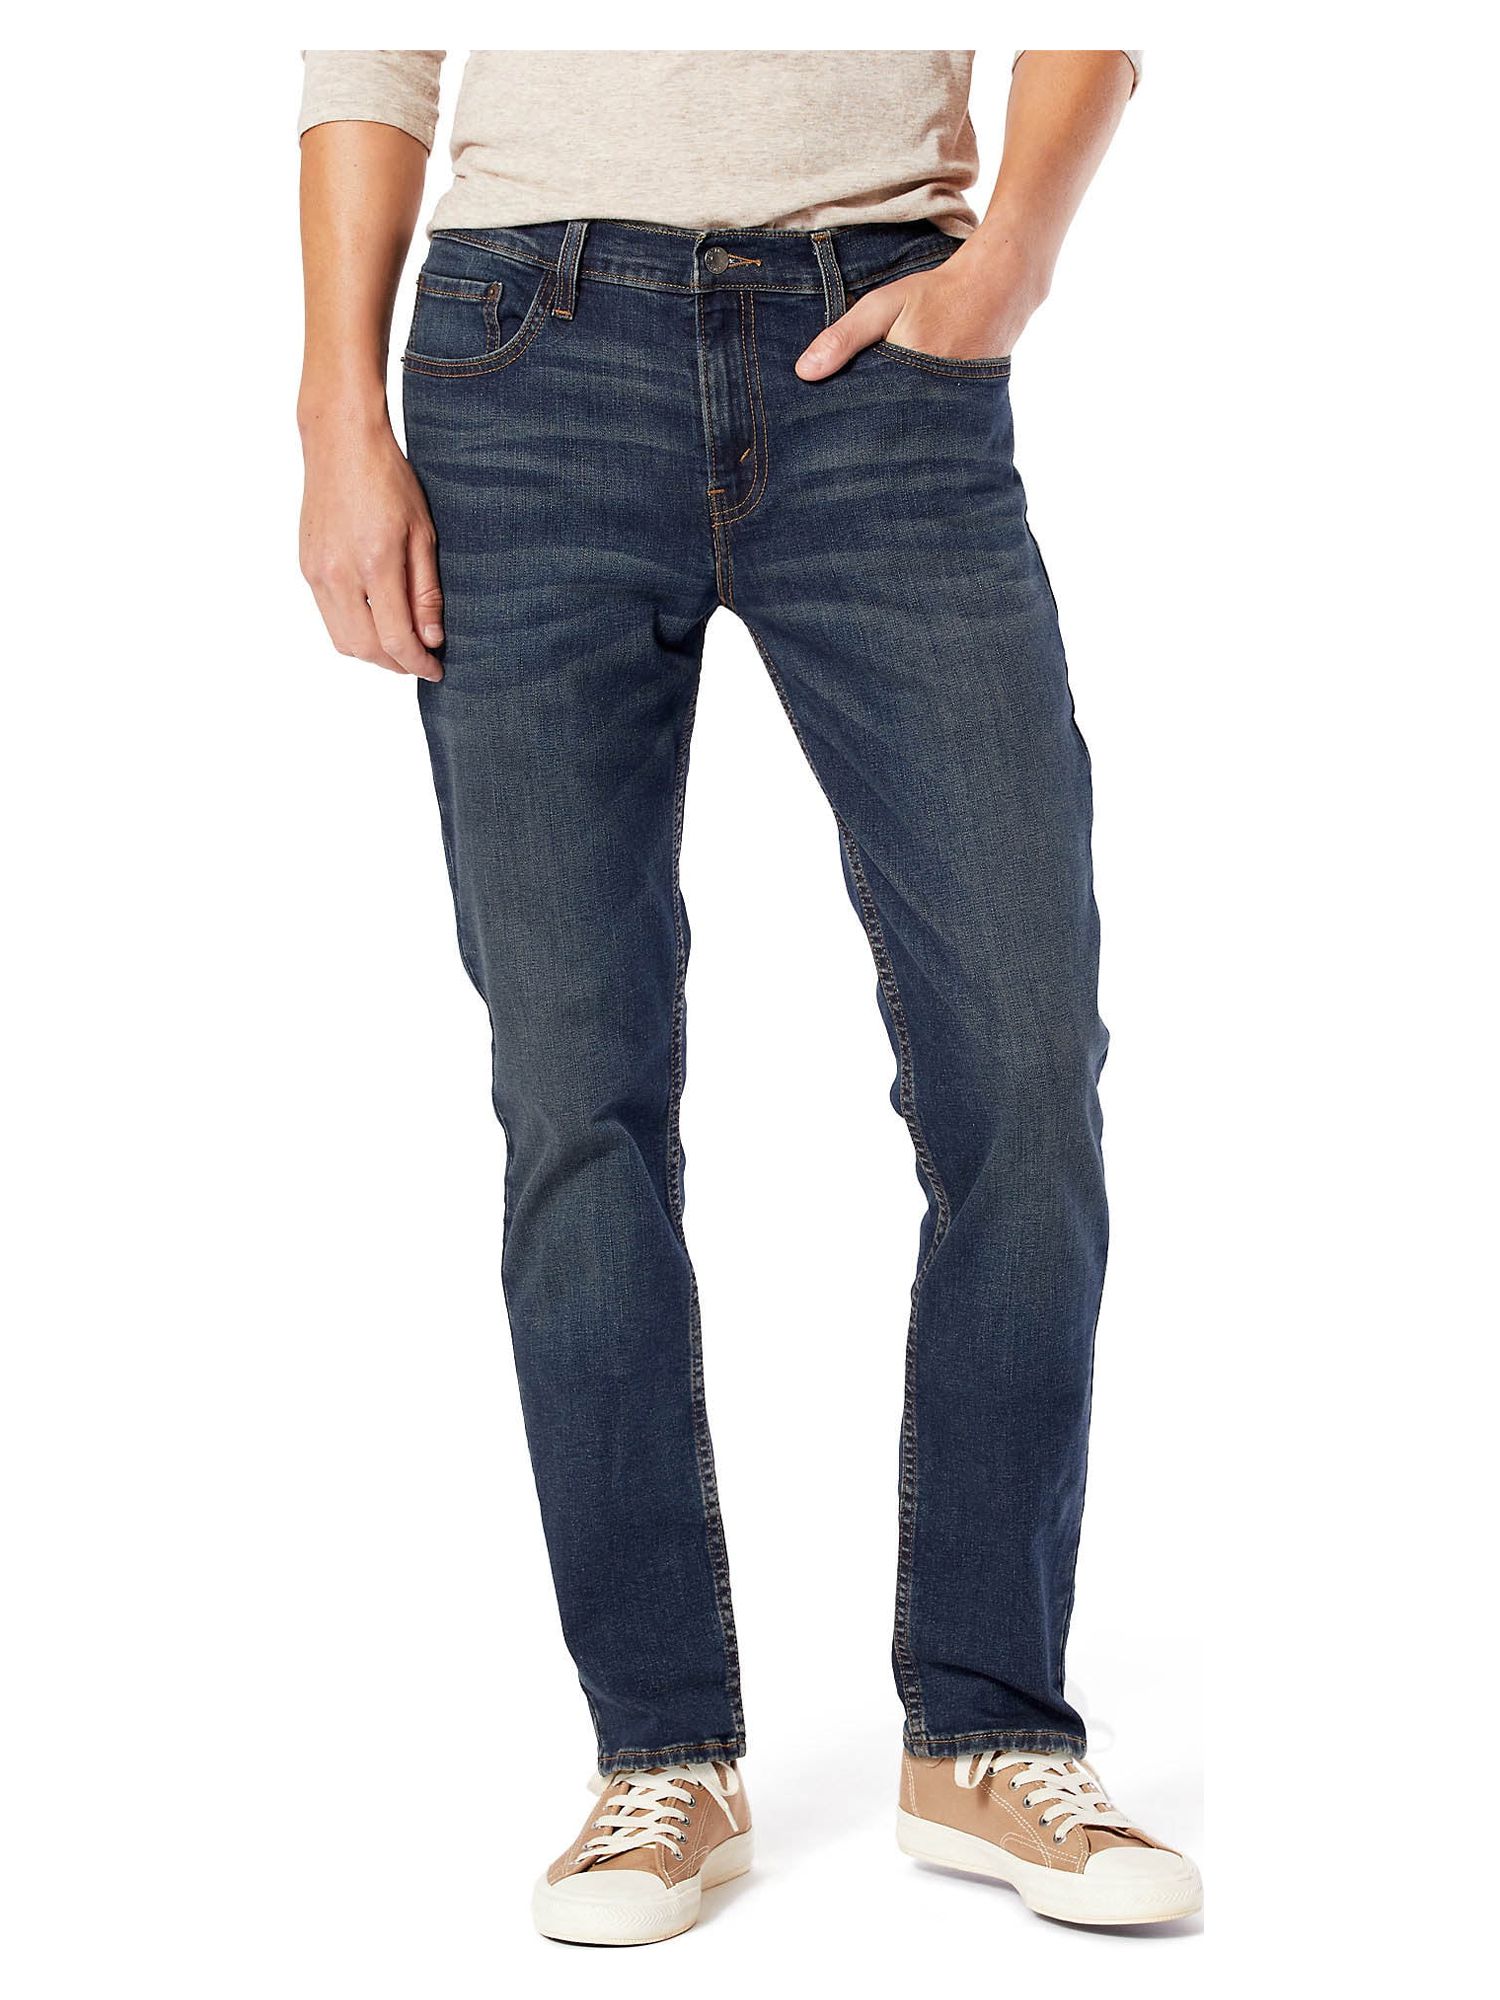 Signature by Levi Strauss & Co. Men's and Big Men's Slim Fit Jeans - image 1 of 6